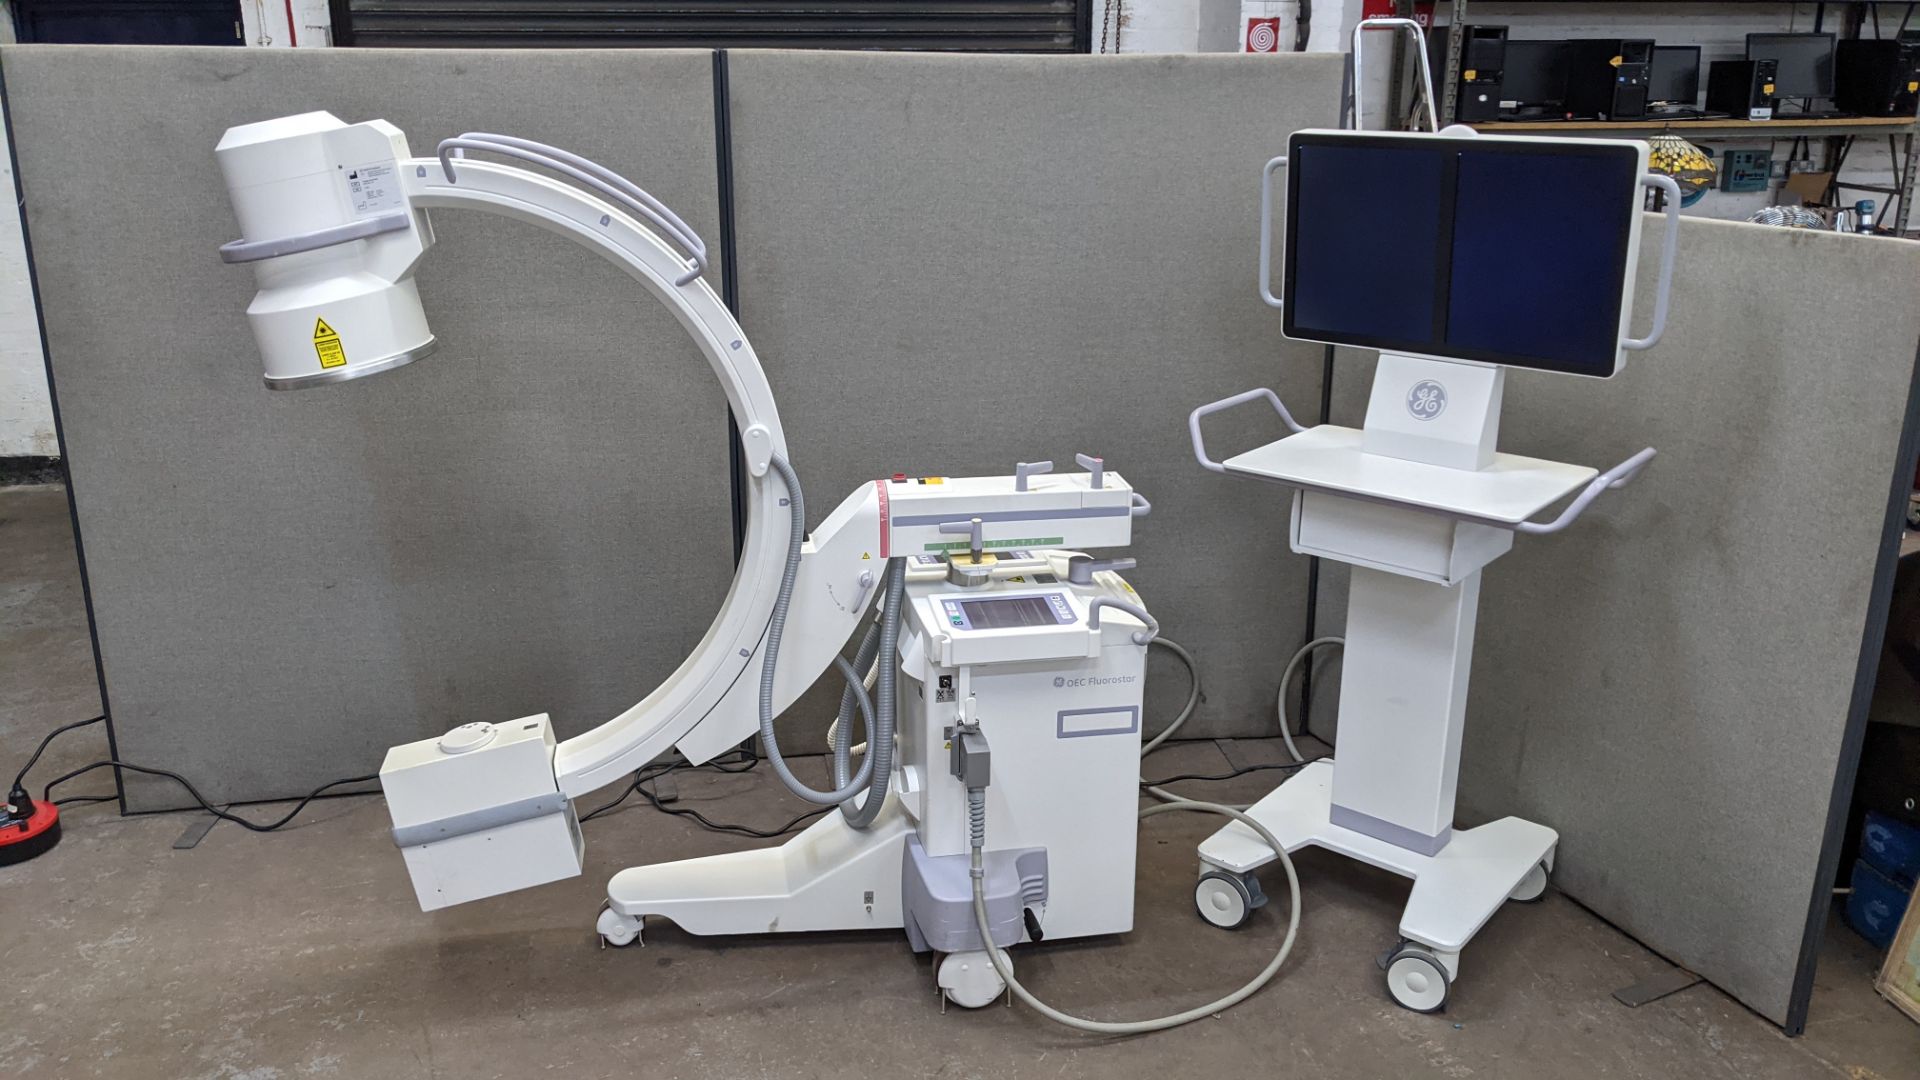 GE-OEC Fluorostar imaging system, purchased new in August 2017. EO4 Series. - Image 3 of 68